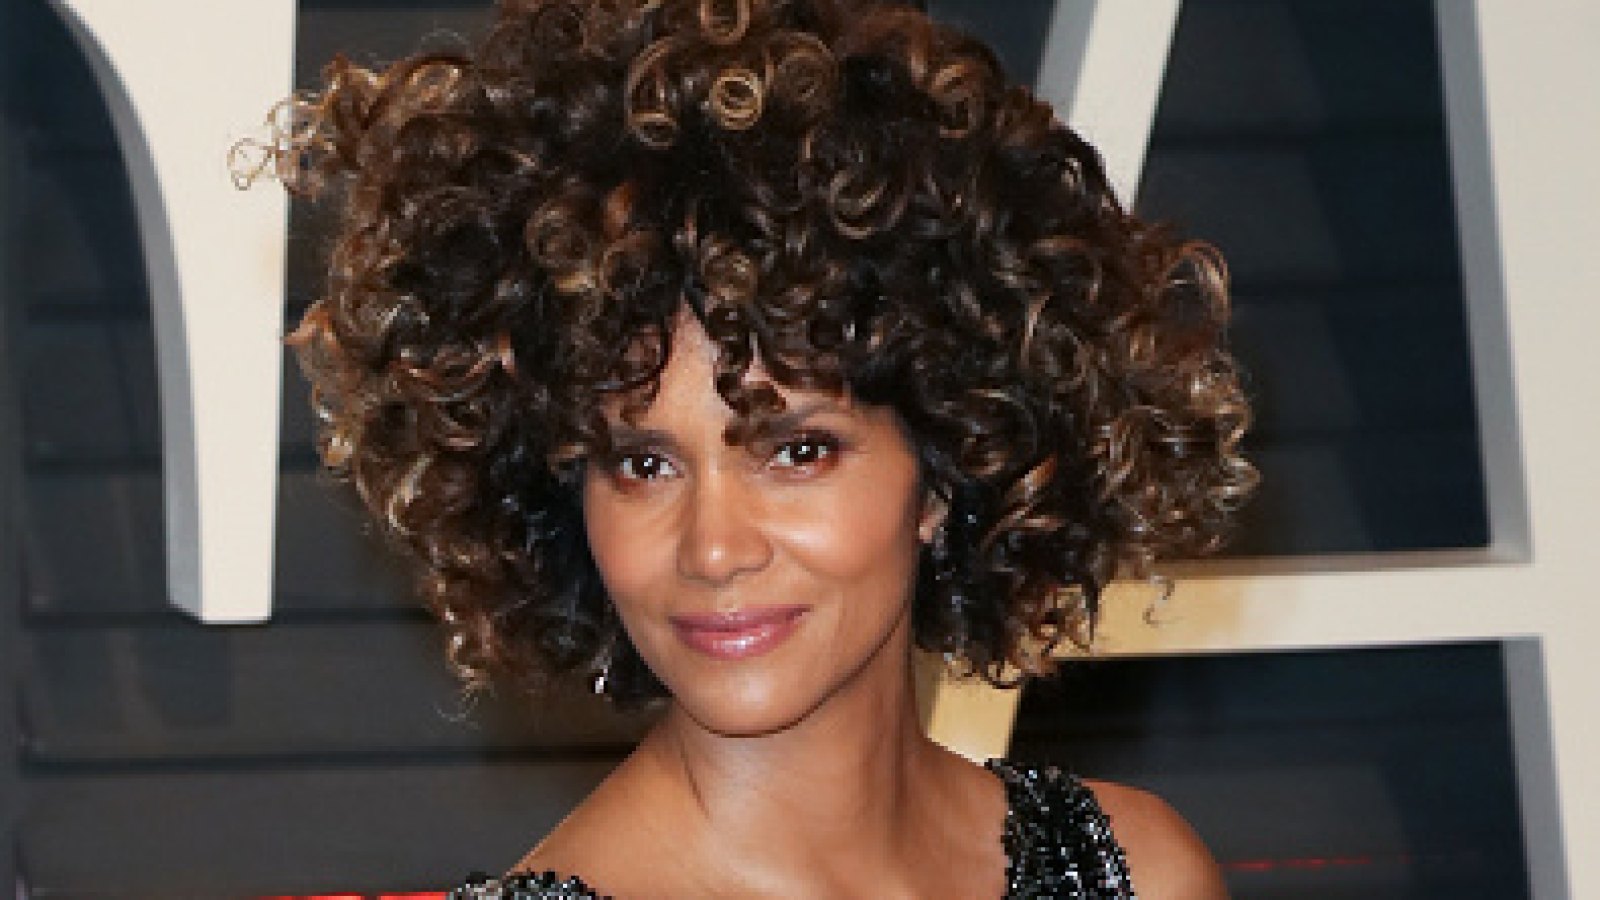 Halle Berry Poses Braless in Sheer Top, Twitter Reacts